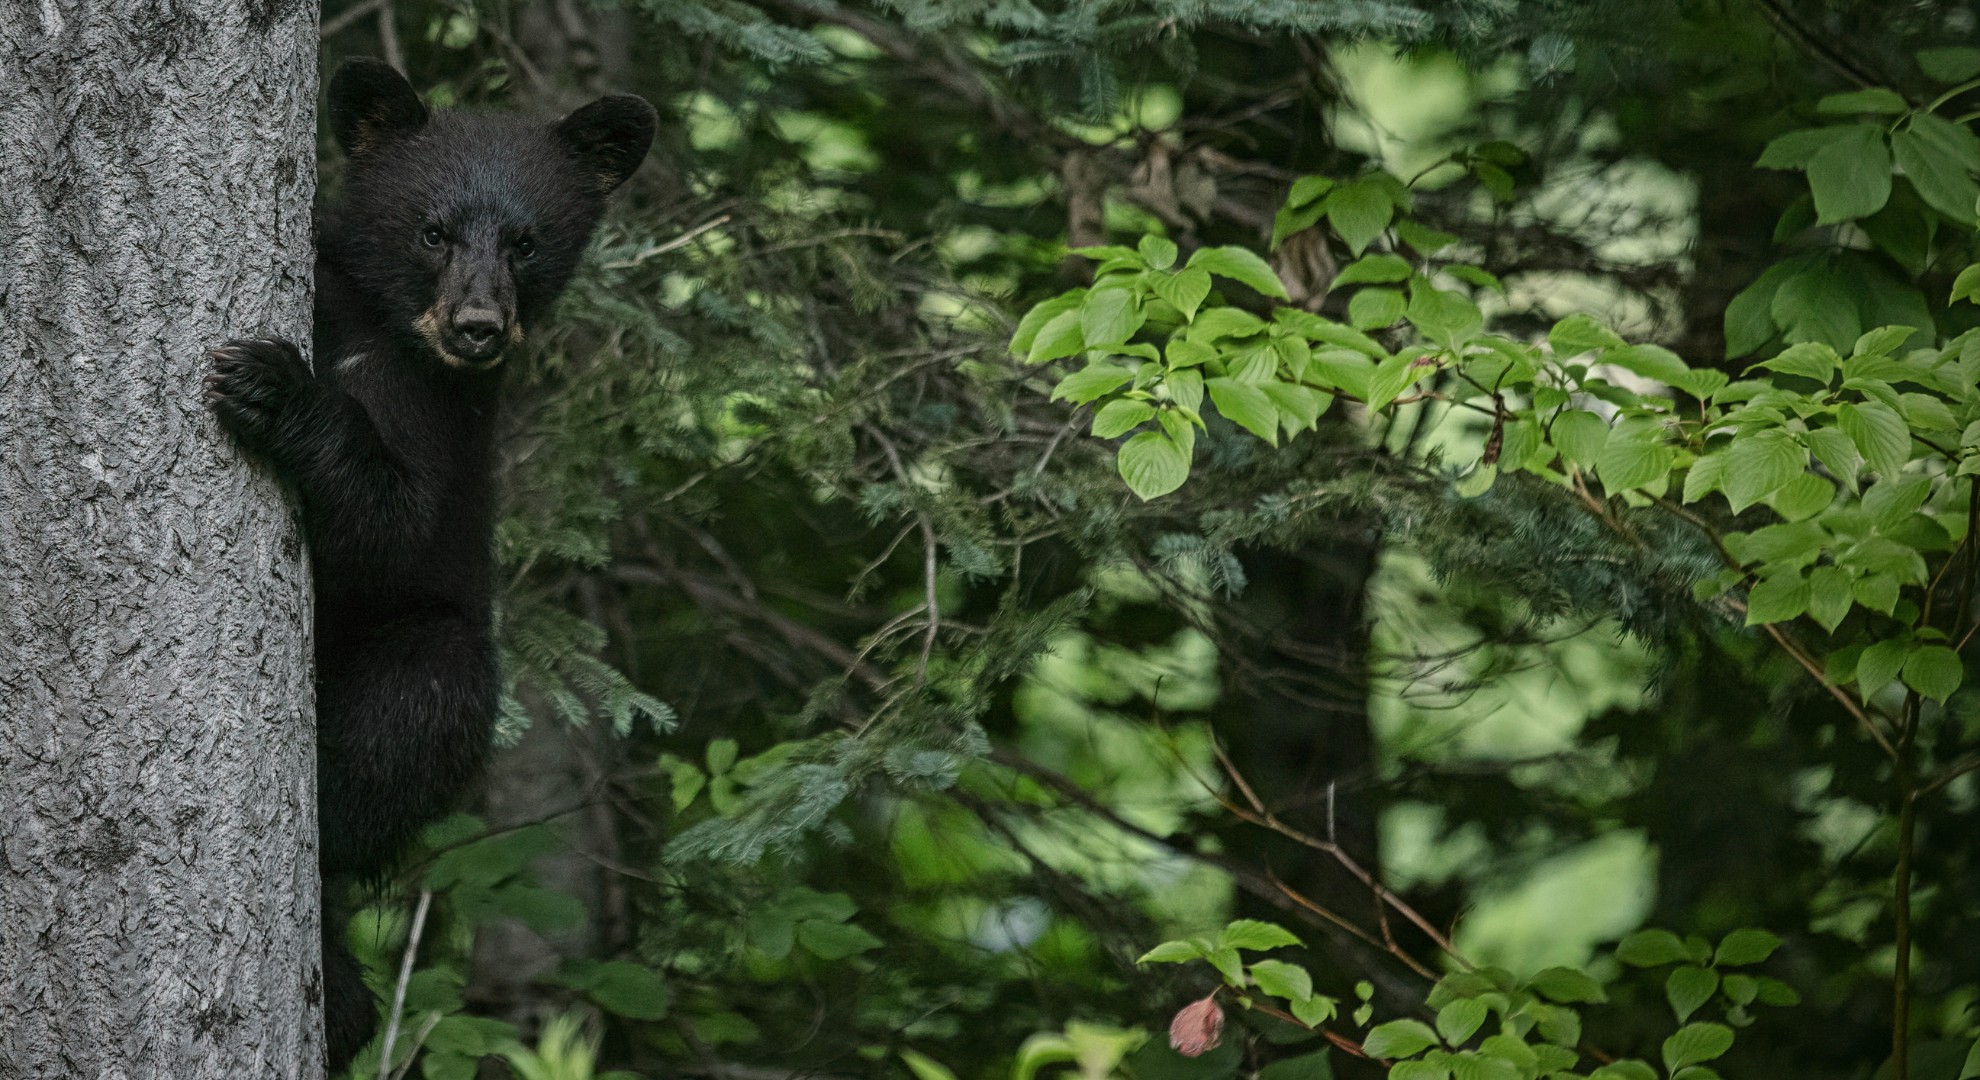 The Bare Facts on Black Bears - Nature Canada